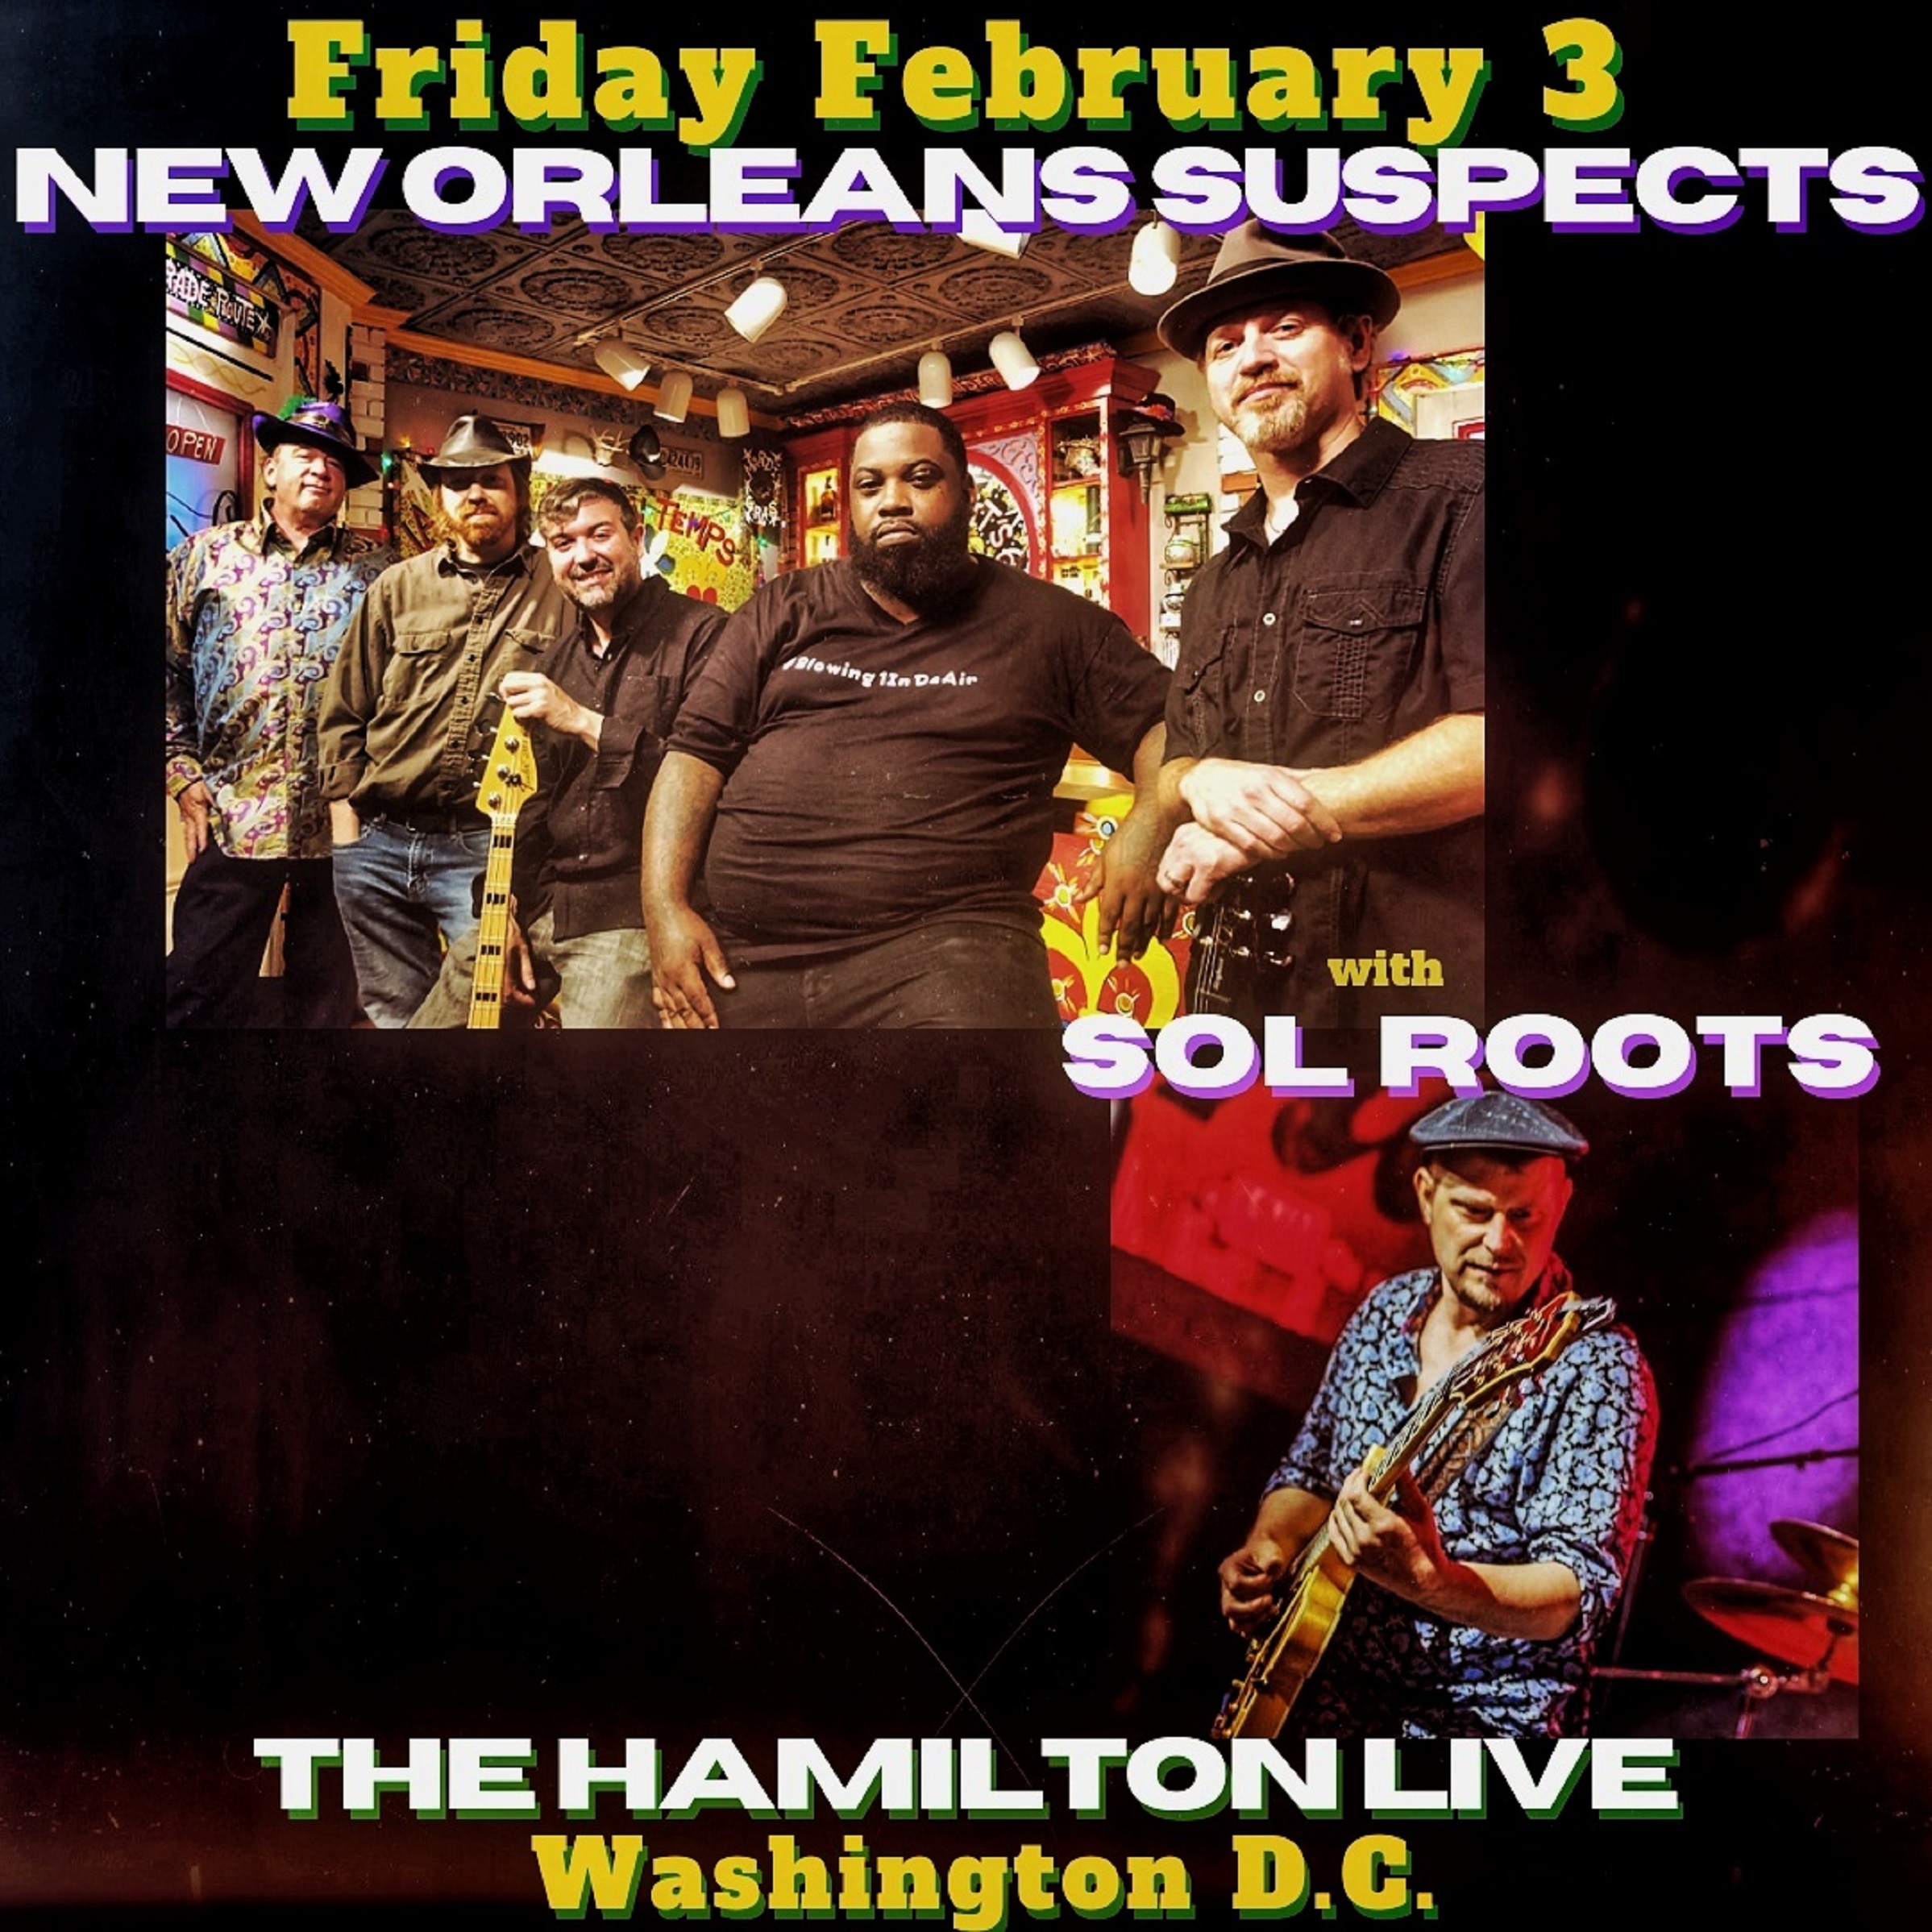 New Orleans Suspects and Sol Roots perform at The Hamilton Live